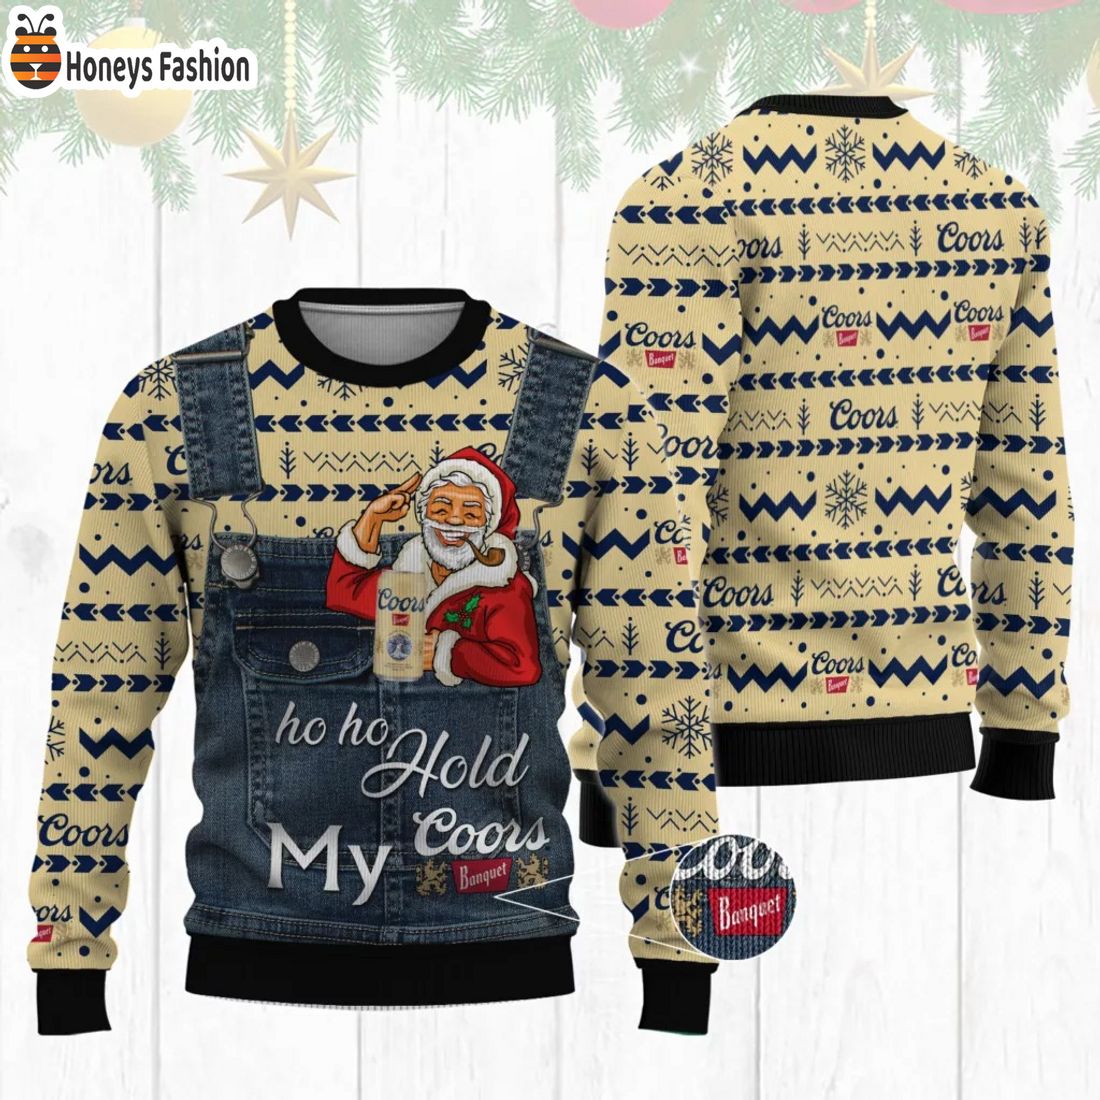 Santa Hold My Coors Banquet Ugly Christmas Sweater